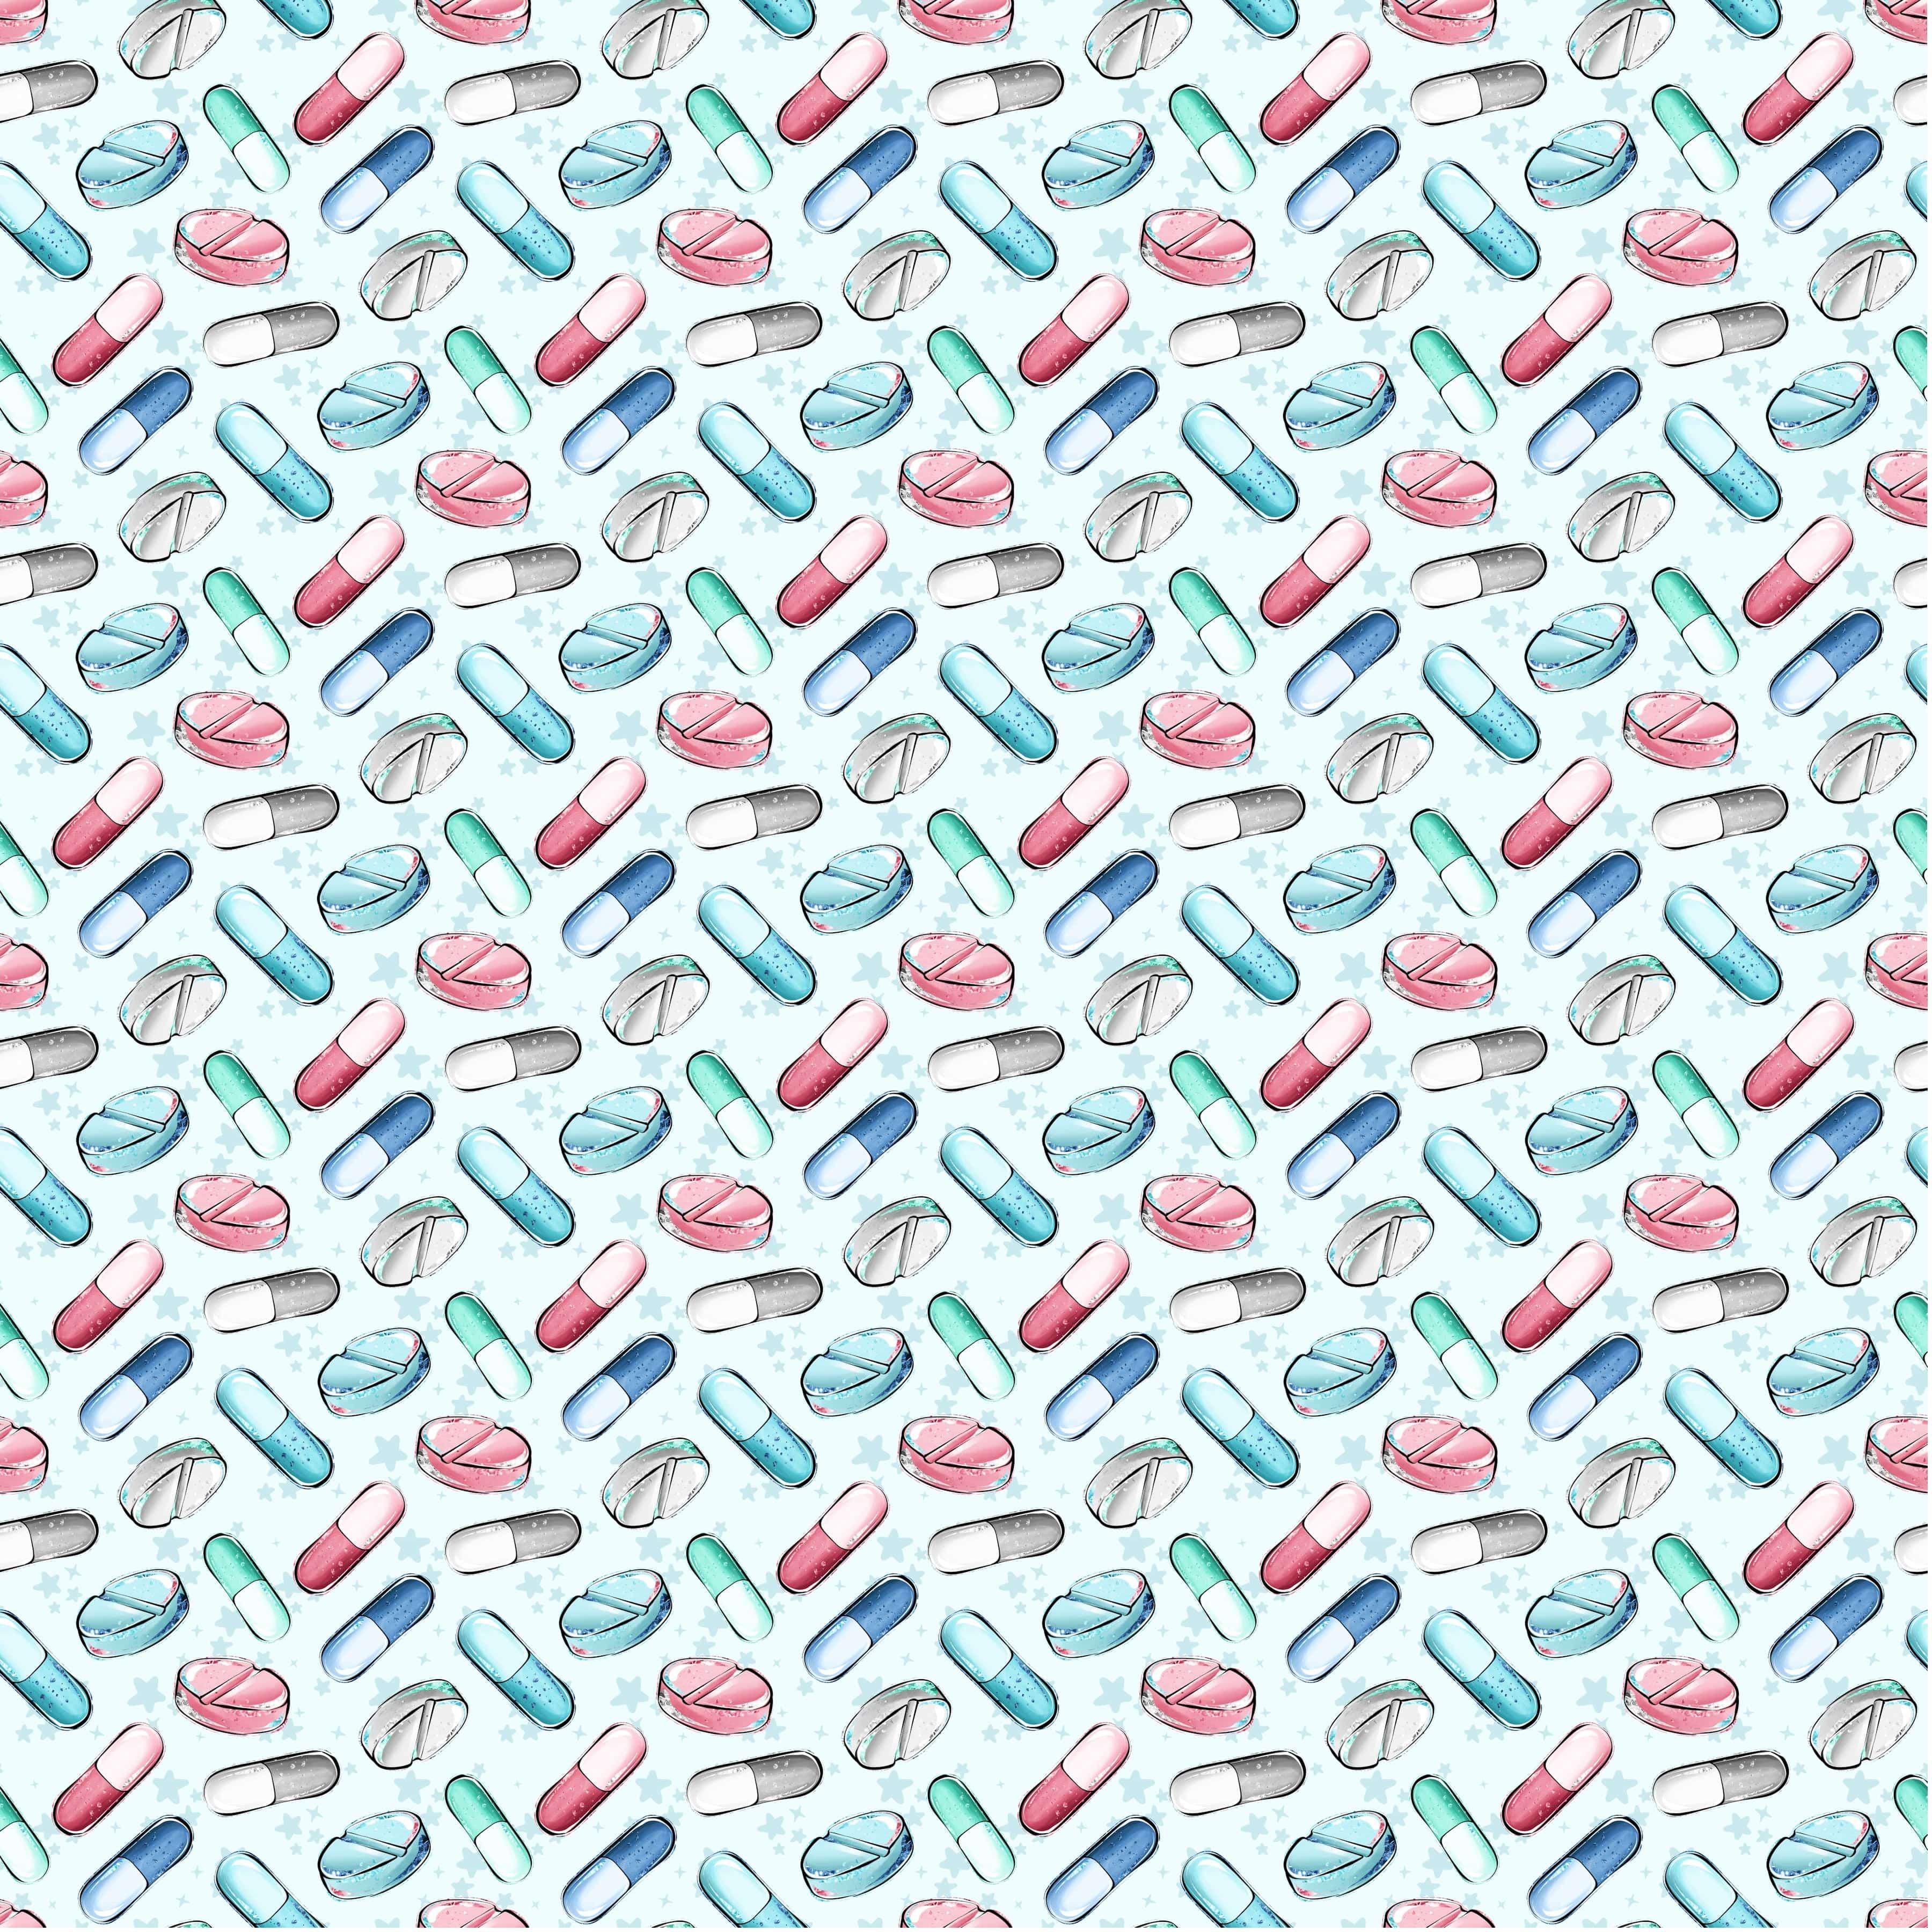  Doctors & Nurses Collection Pill Pusher 12 x 12 Double-Sided Scrapbook Paper by SSC Designs - Scrapbook Supply Companies